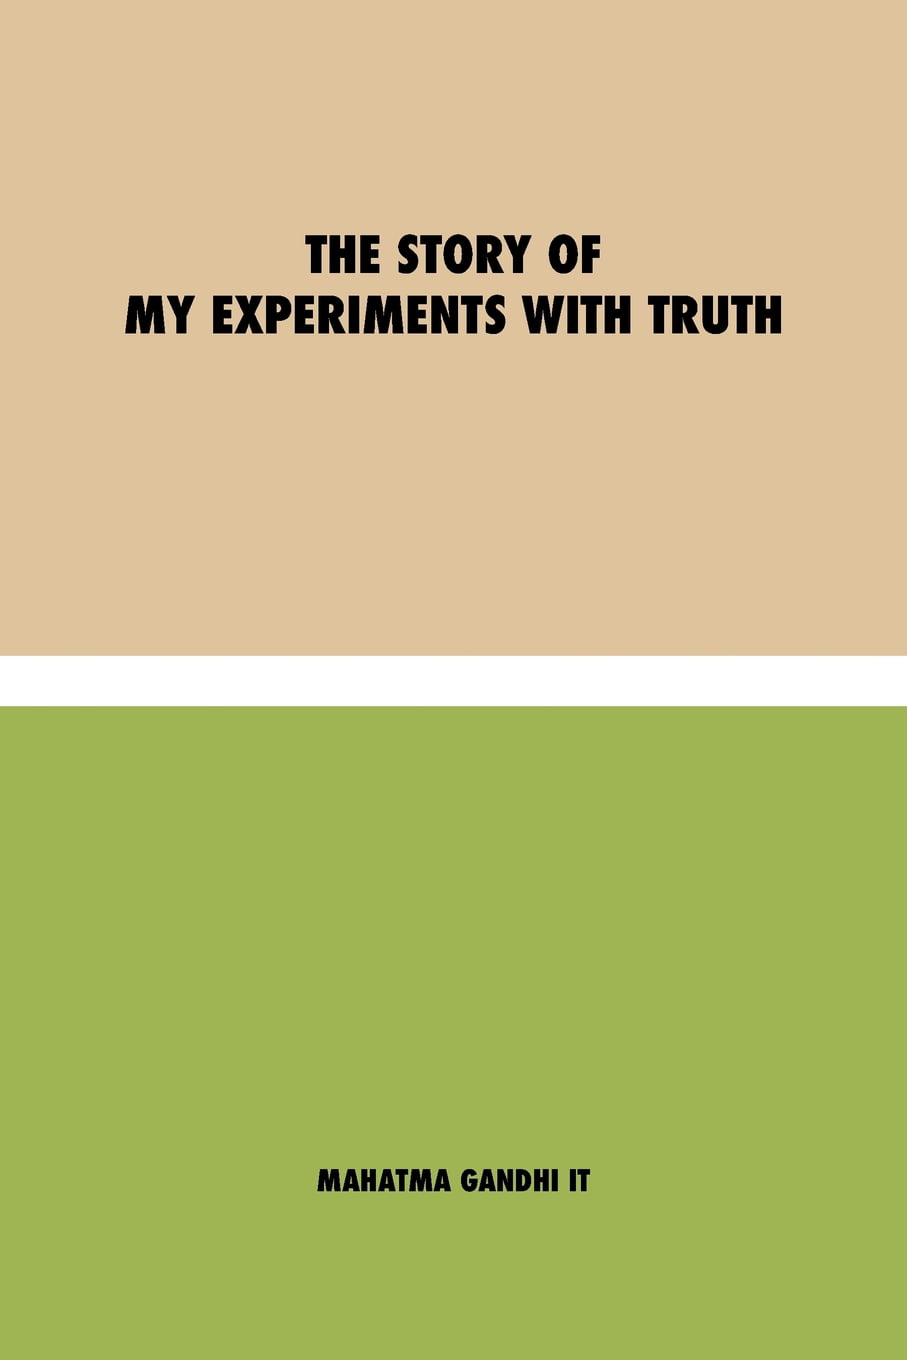 book review the story of my experiments with truth